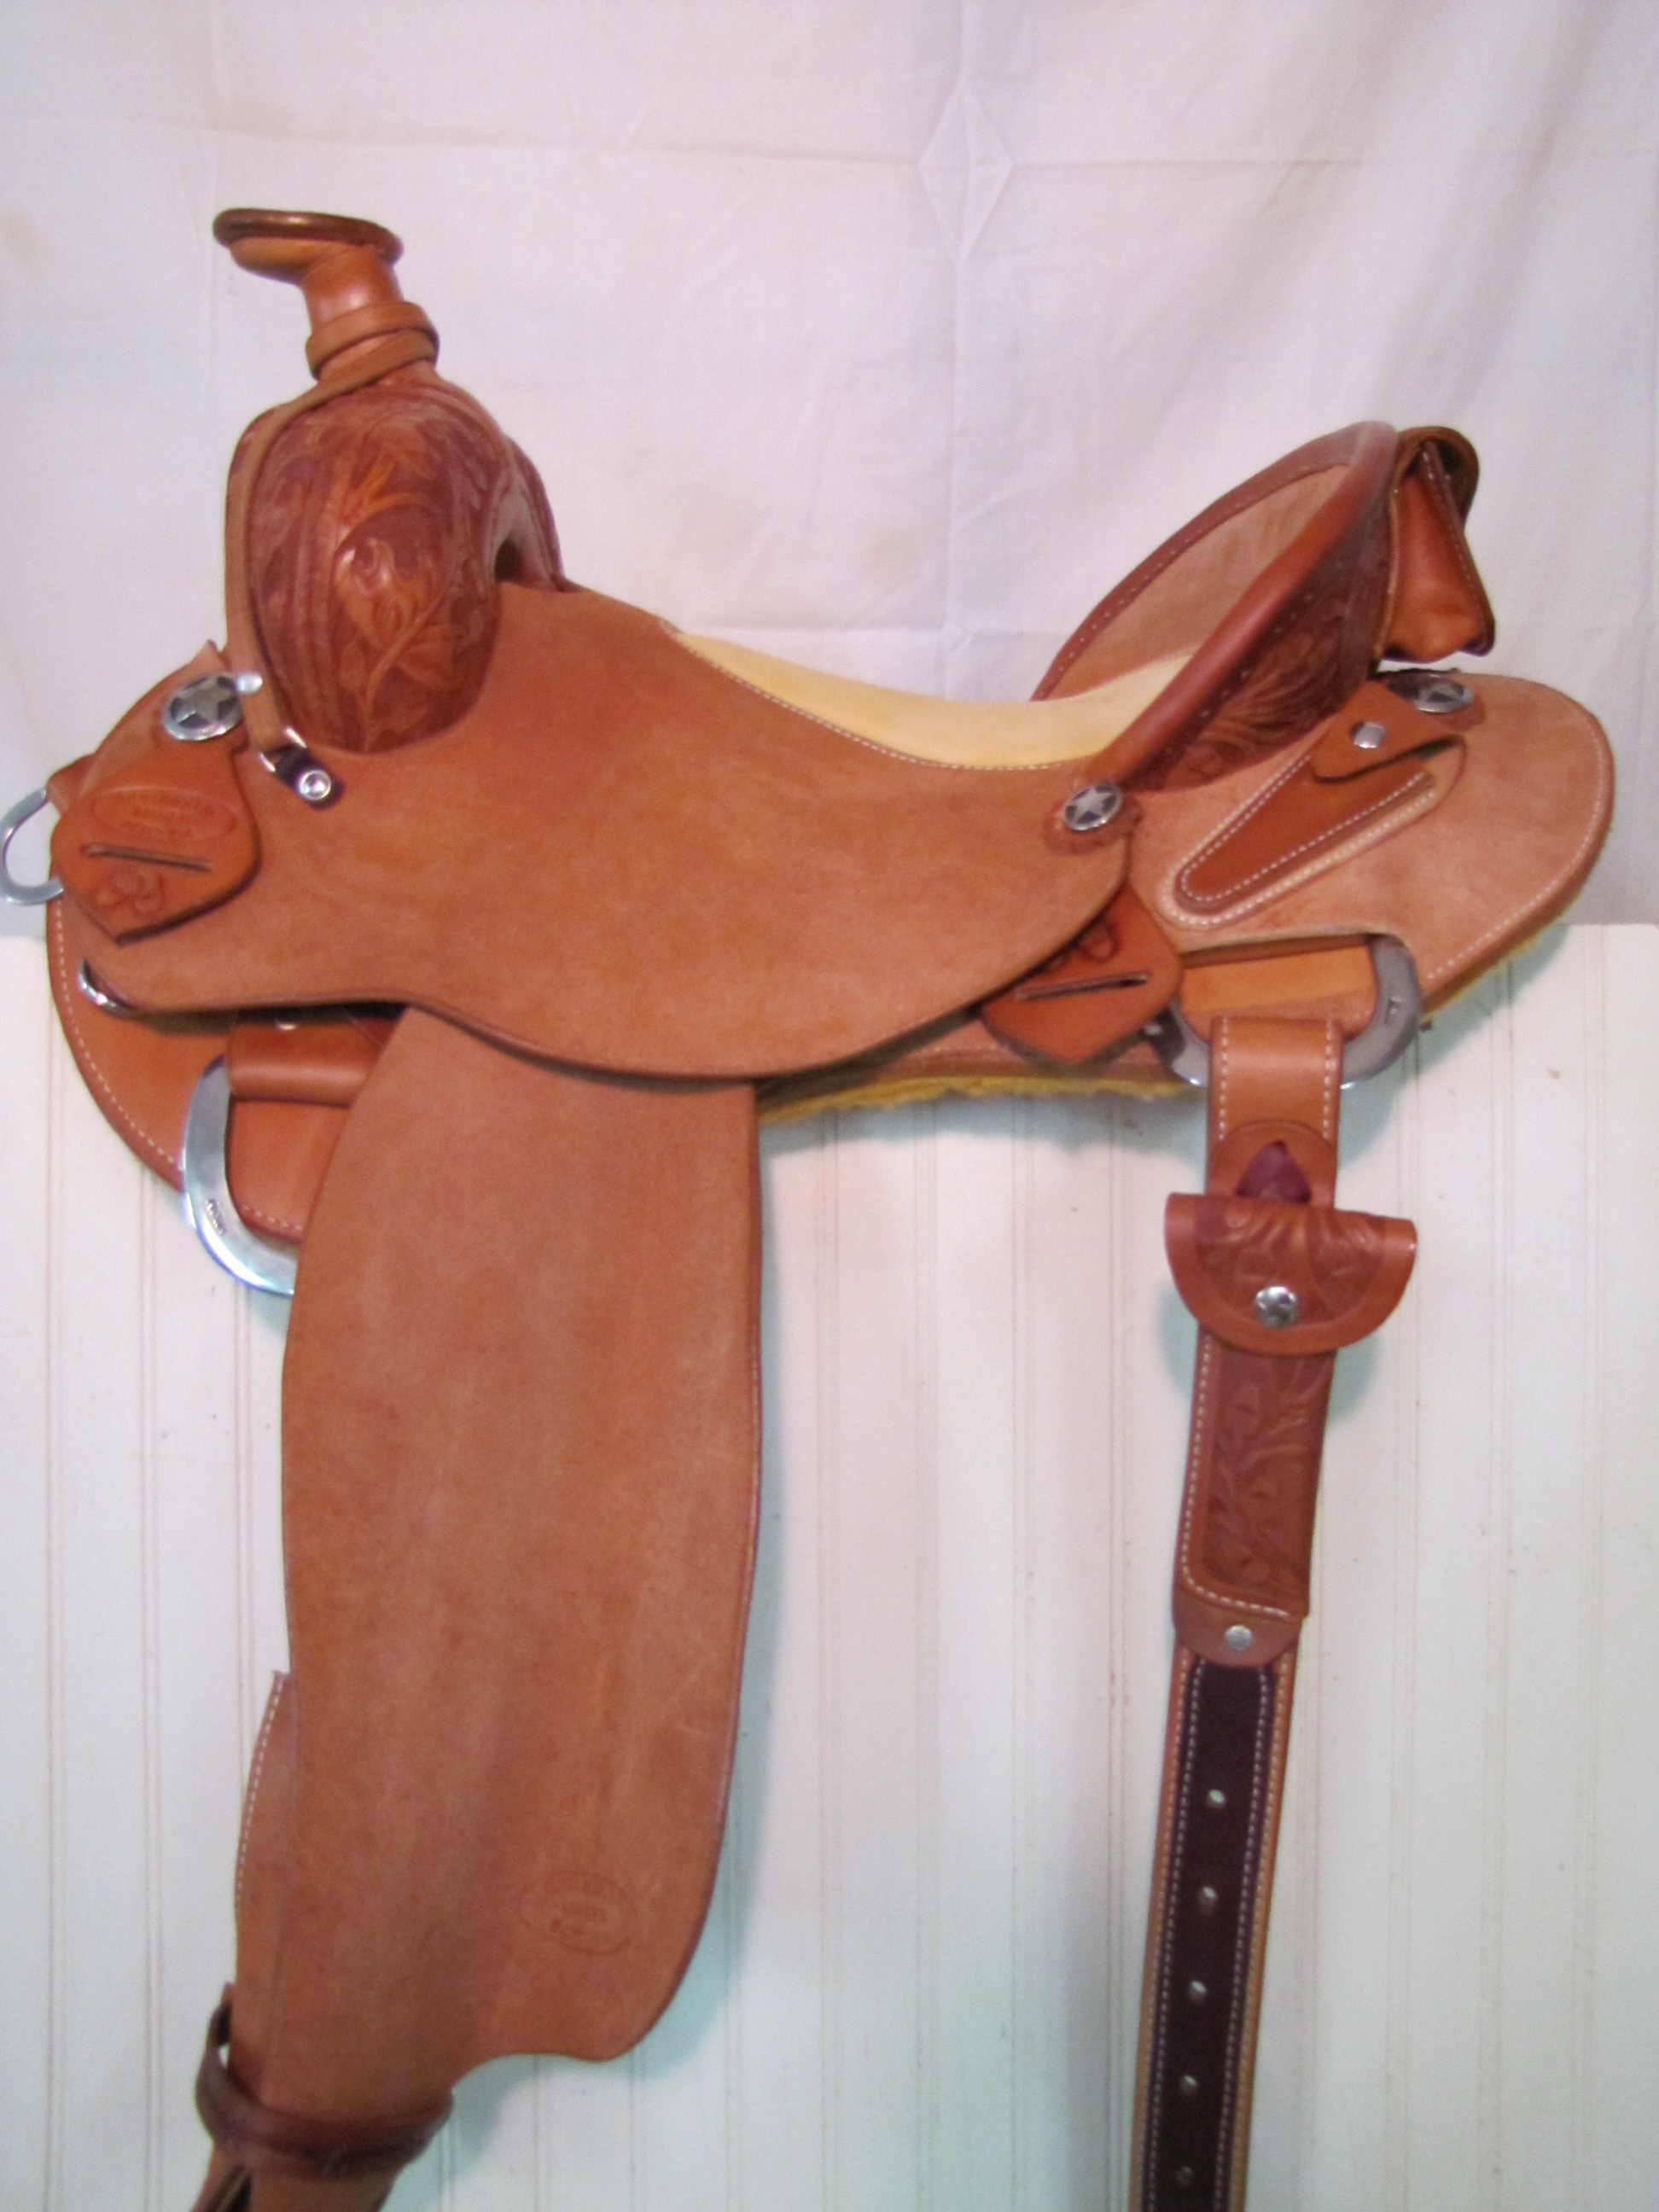 Click for more saddles!